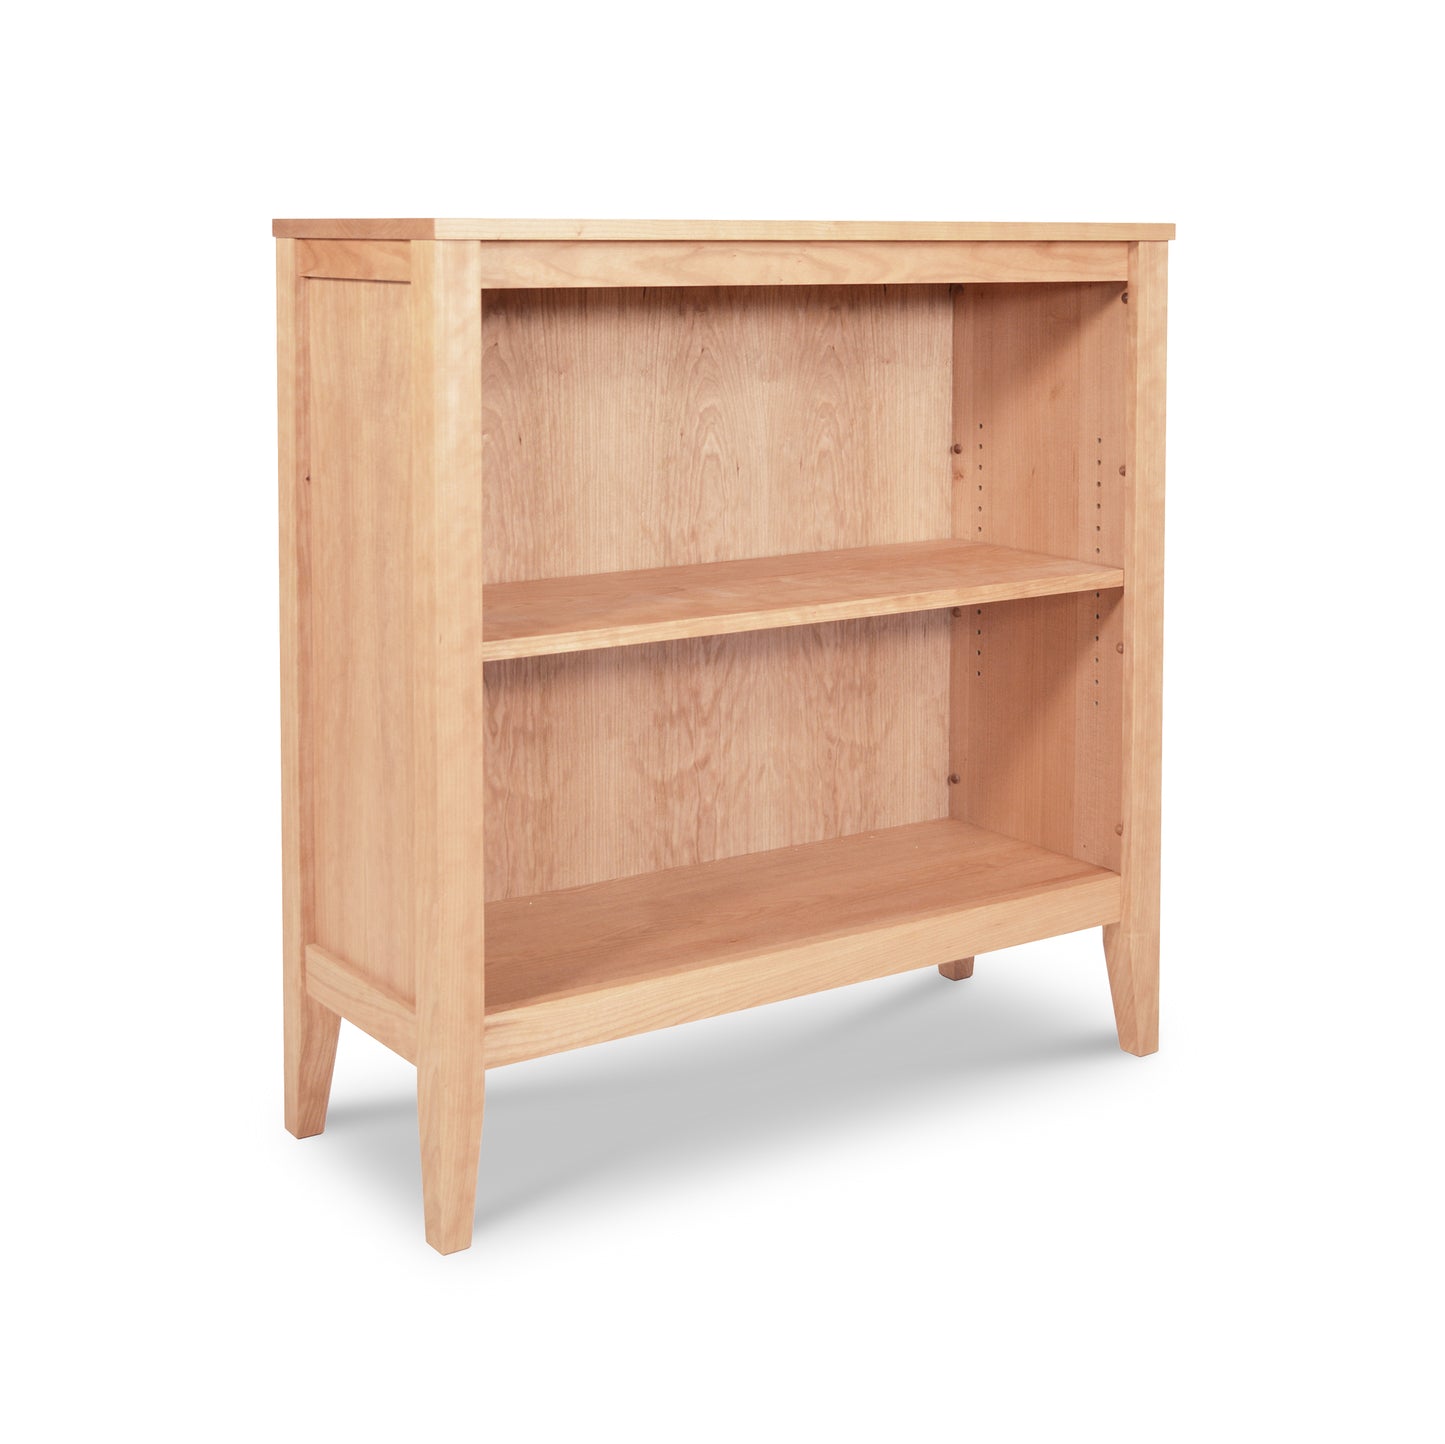 An Maple Corner Woodworks Andover Modern Bookcase, wooden with two shelves, empty and isolated on a white background.